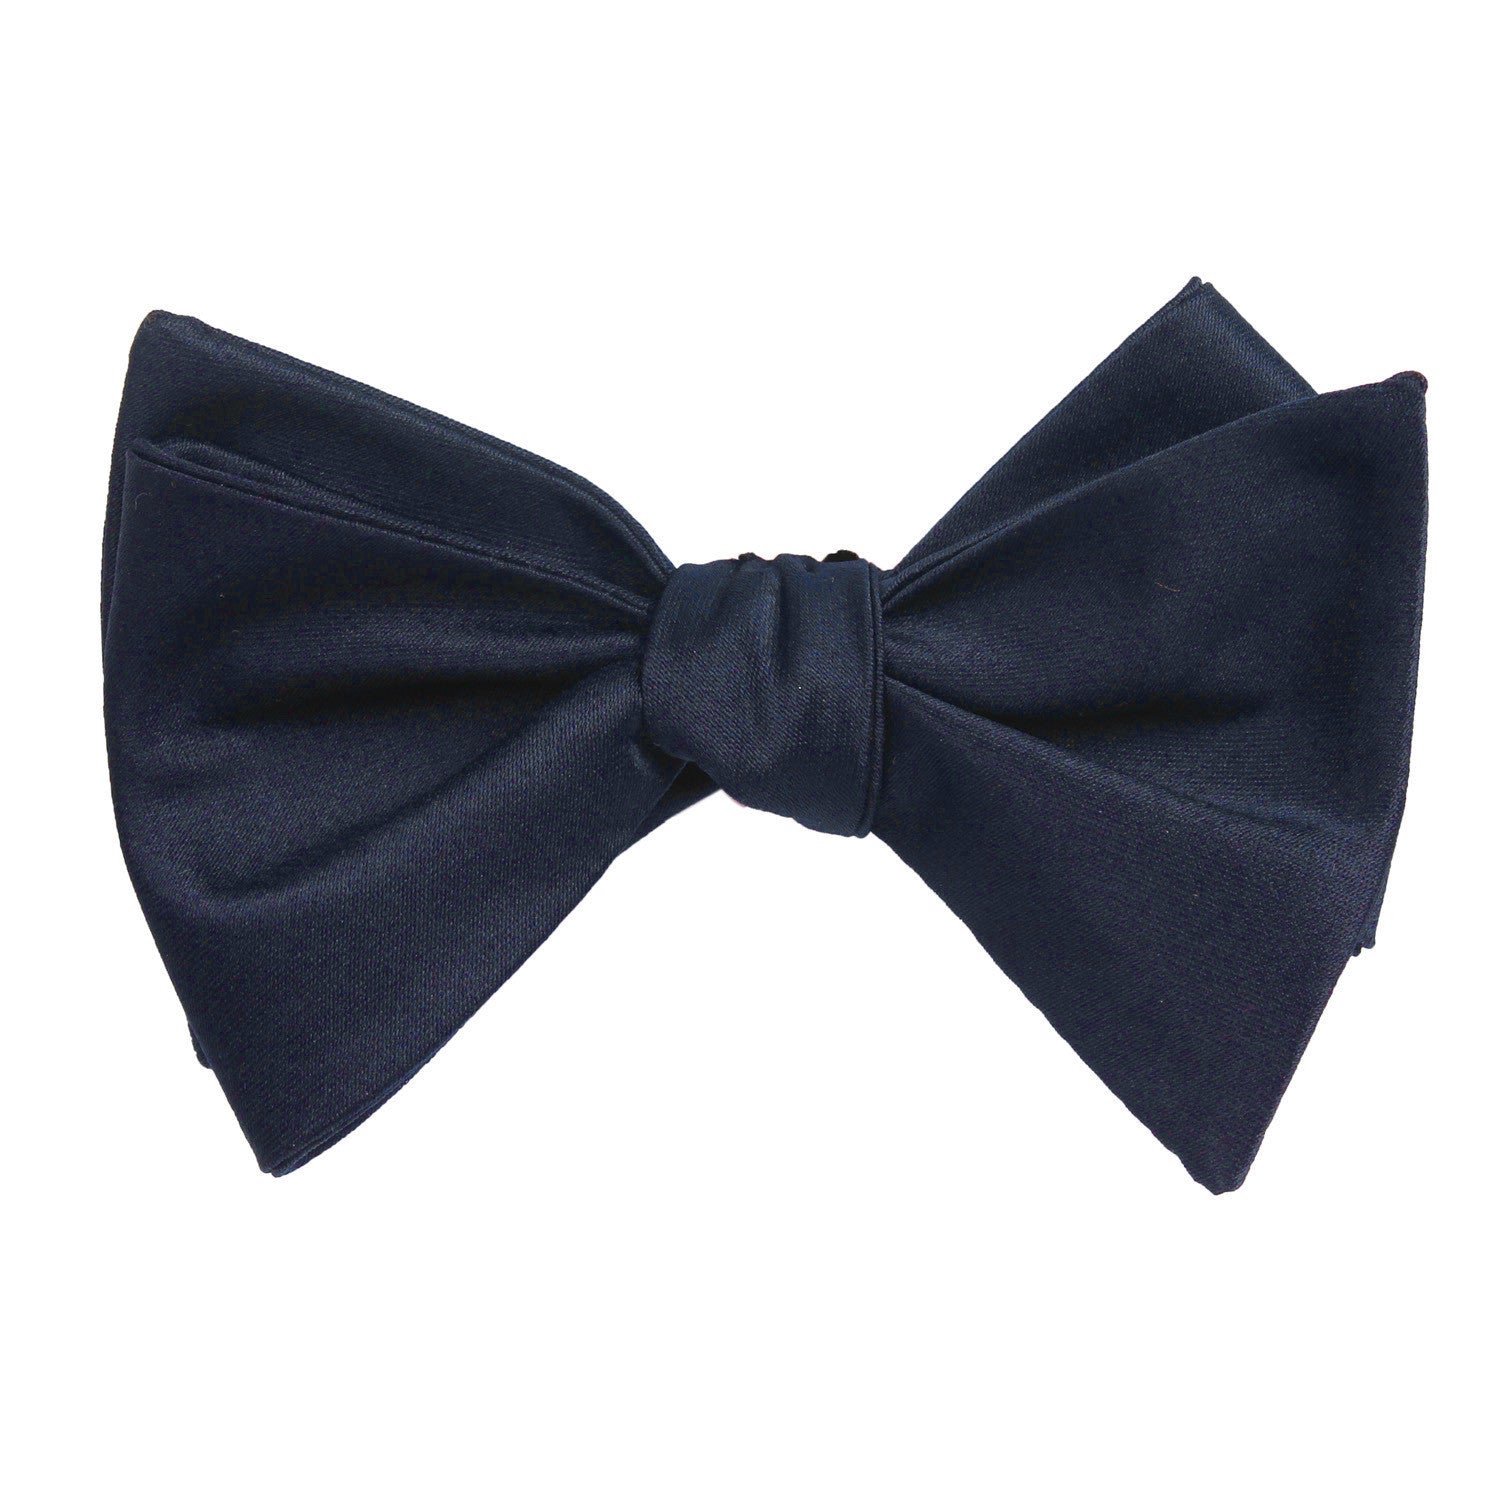 Navy Blue - Bow Tie (Untied) Self tied knot by OTAA